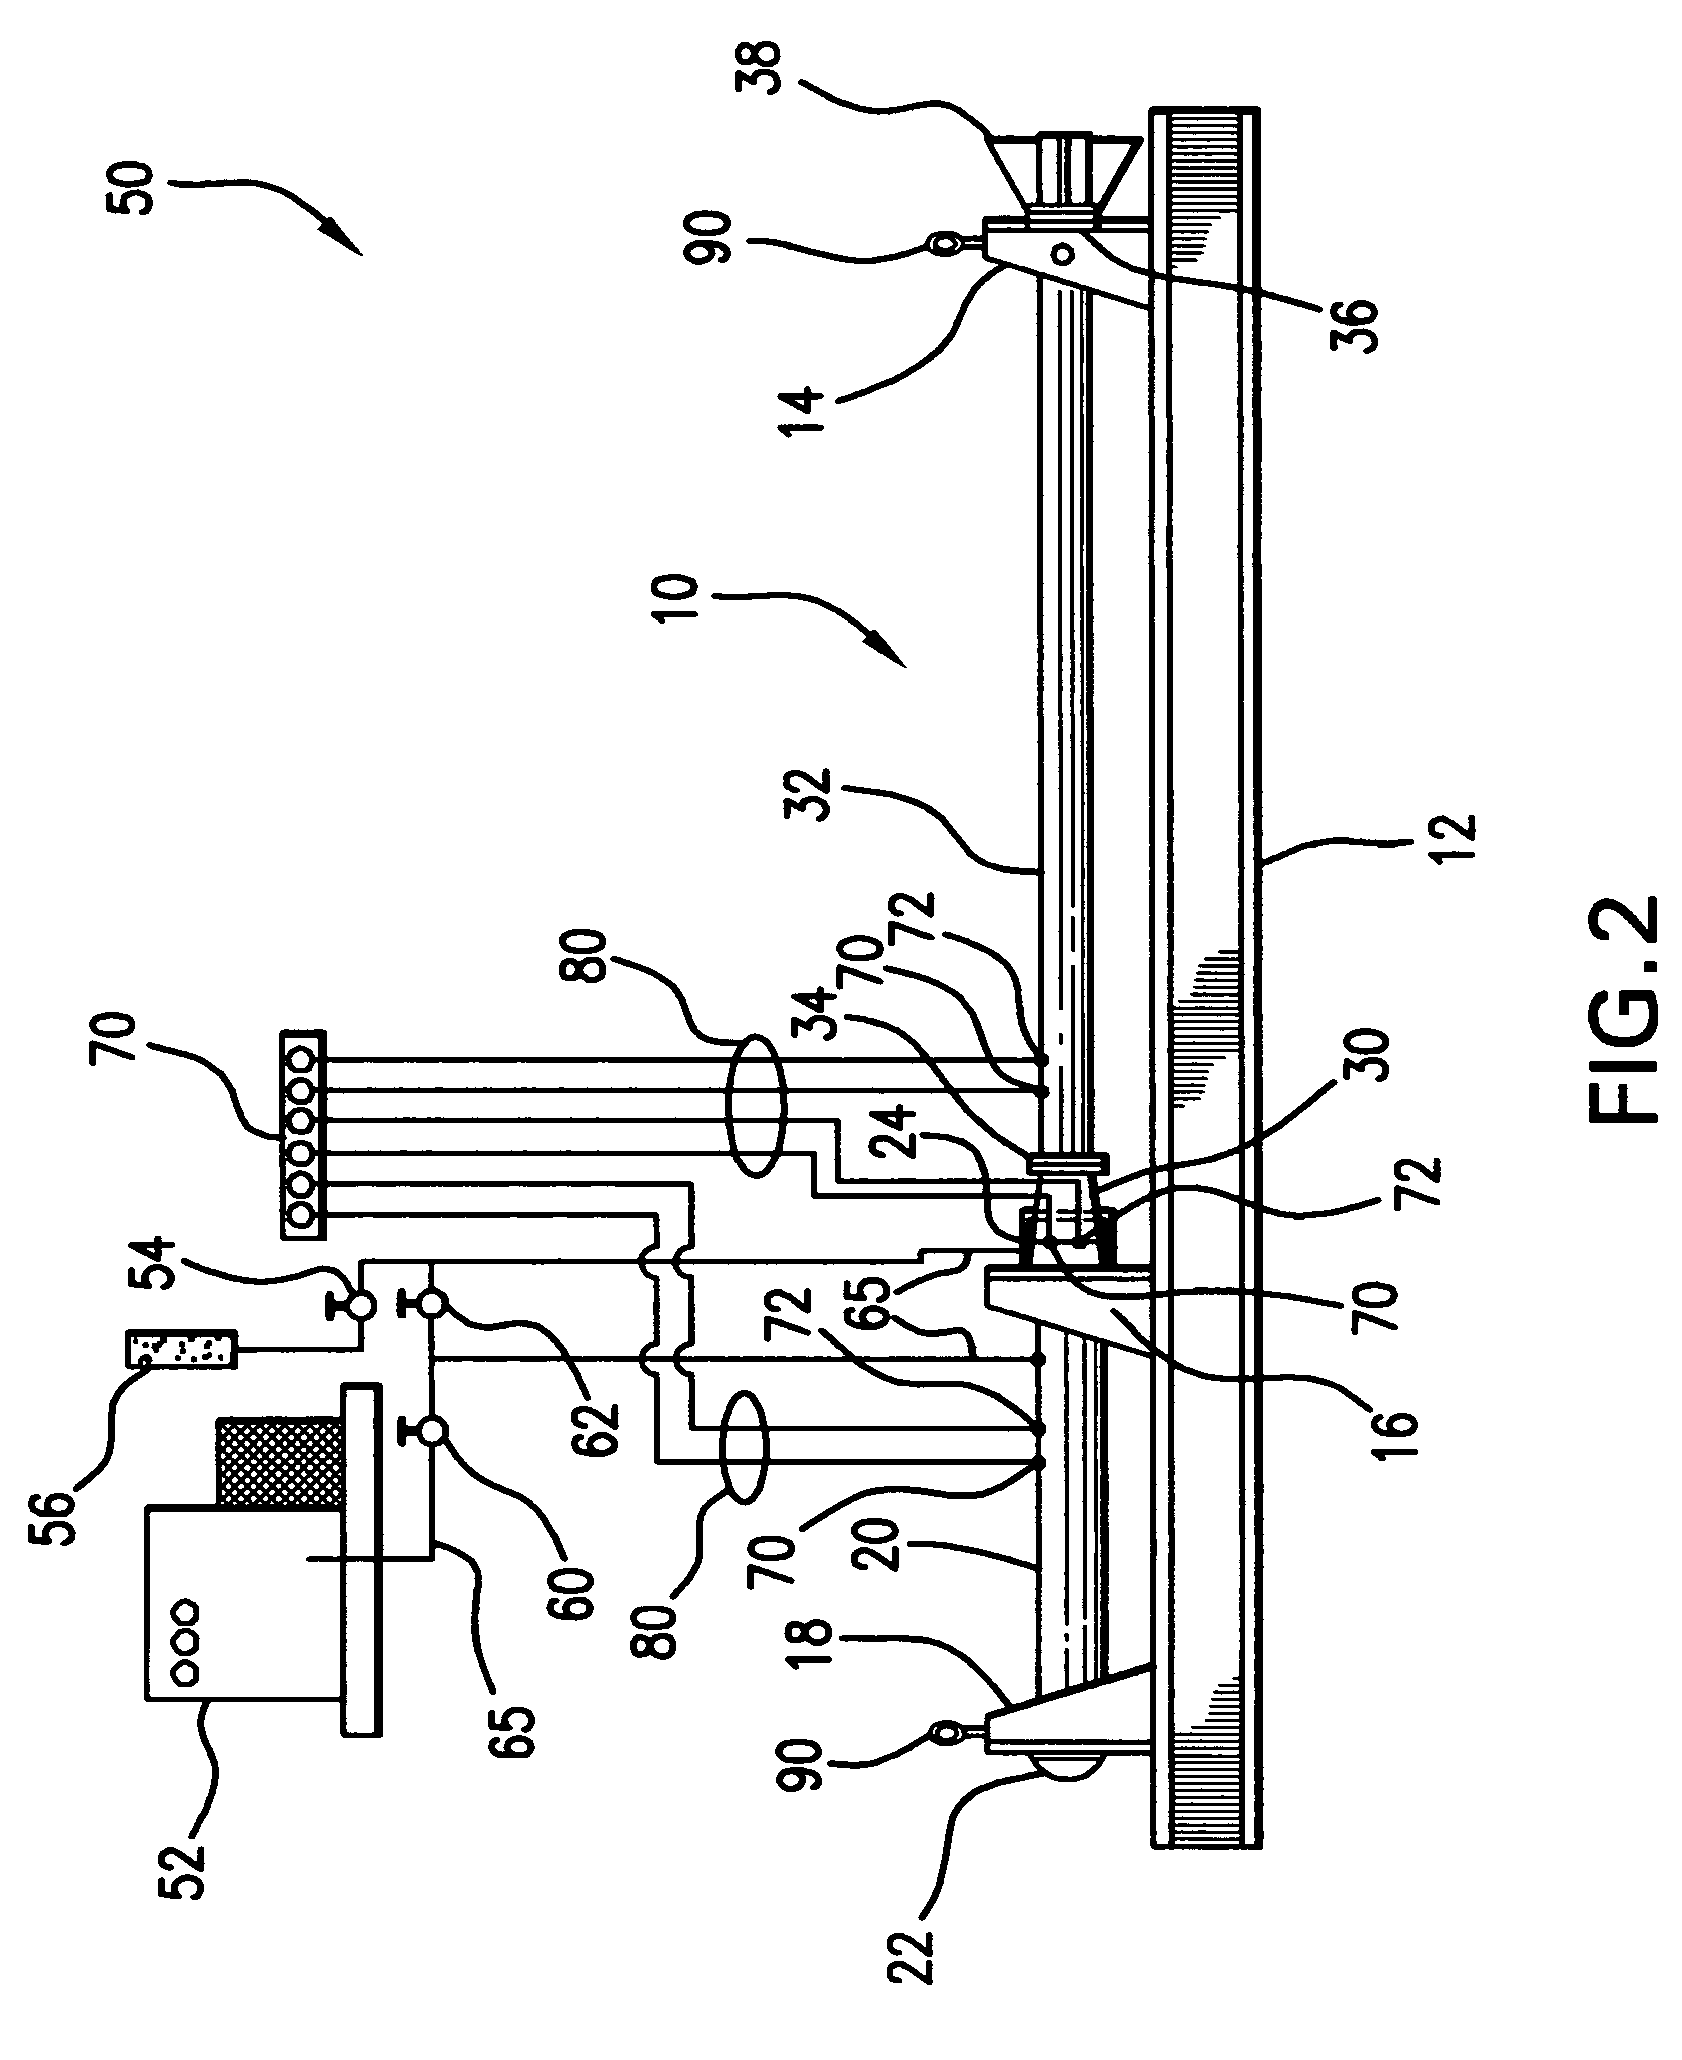 Pneumatic launcher system and method for operating same